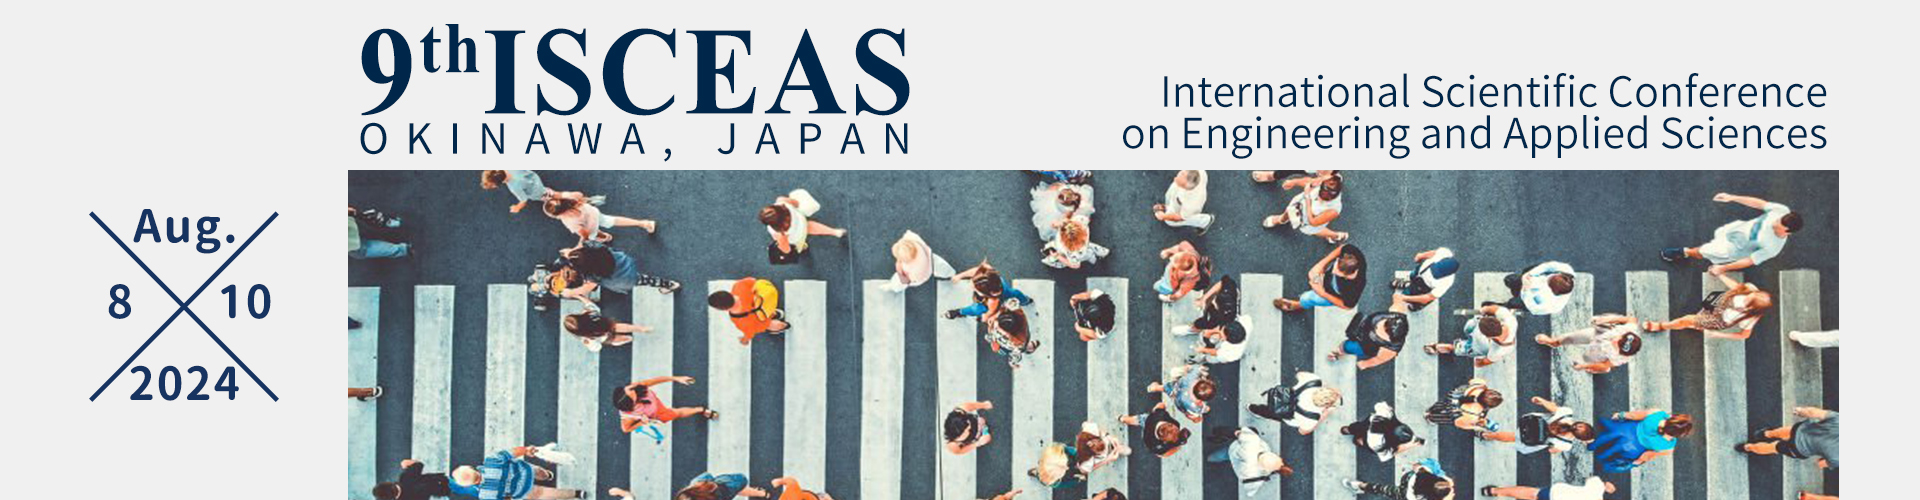 9th ISCEAS  International Scientific Conference on Engineering and Applied Sciences, Okinawa, Japan